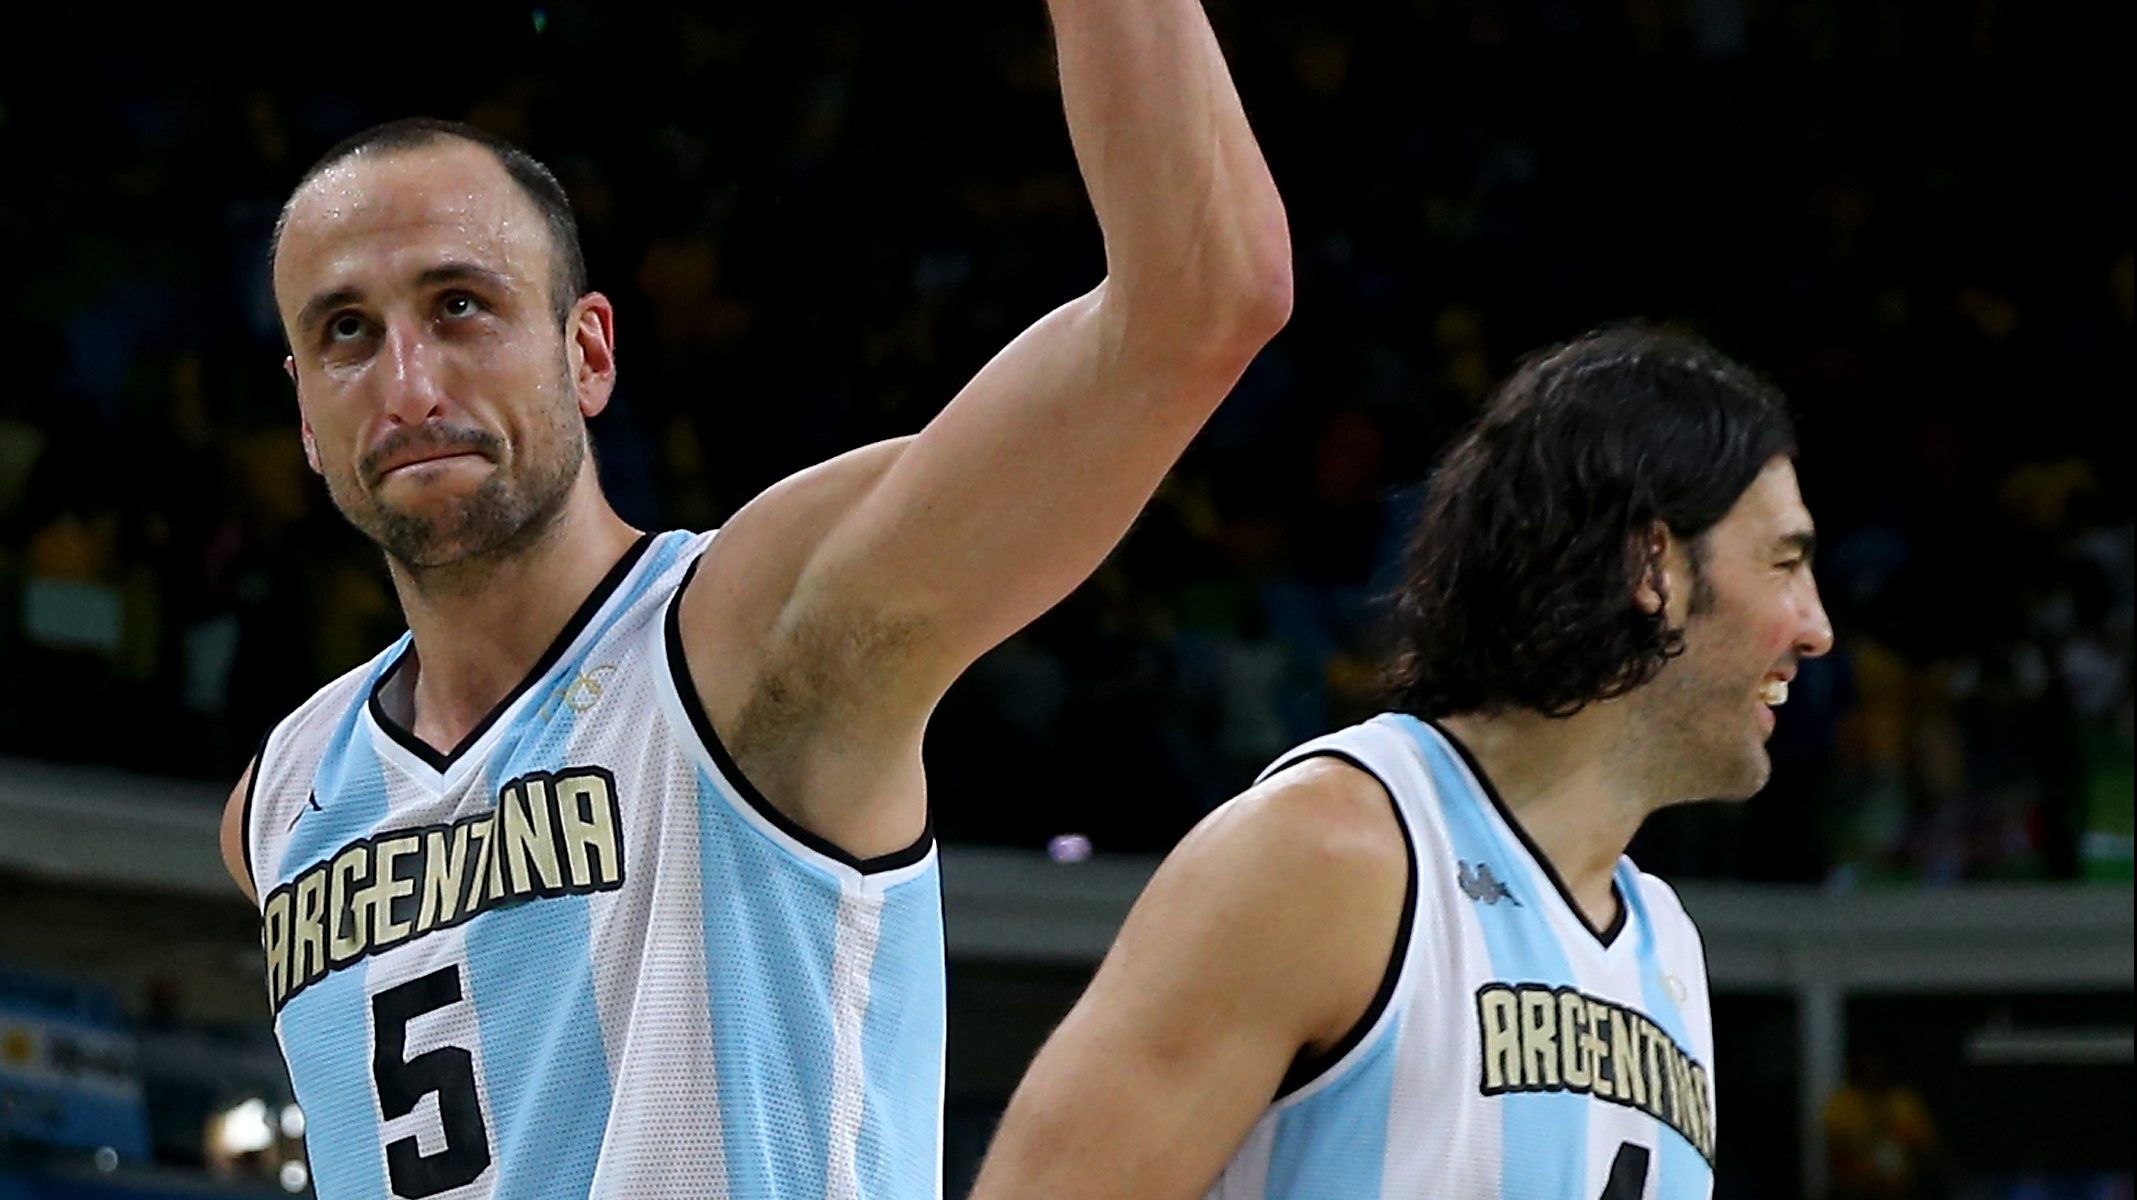 Argentina Olympic Basketball Roster Who’s on the Team?